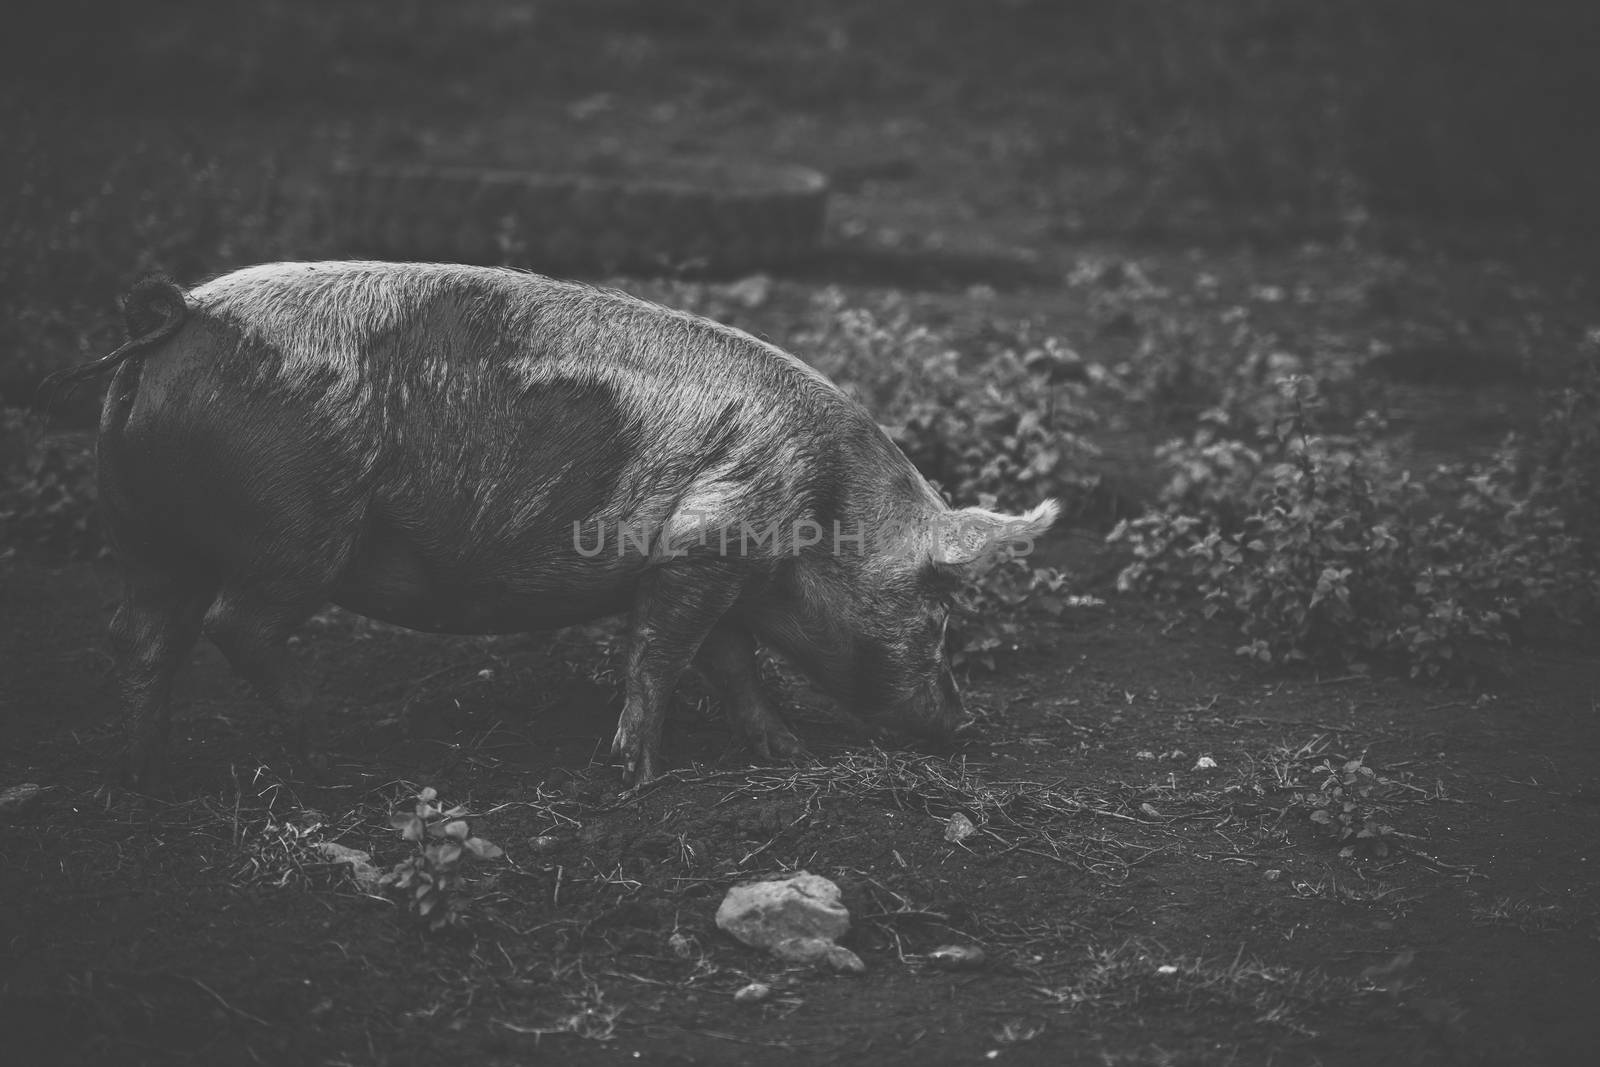 Pig on the farm during the day time.